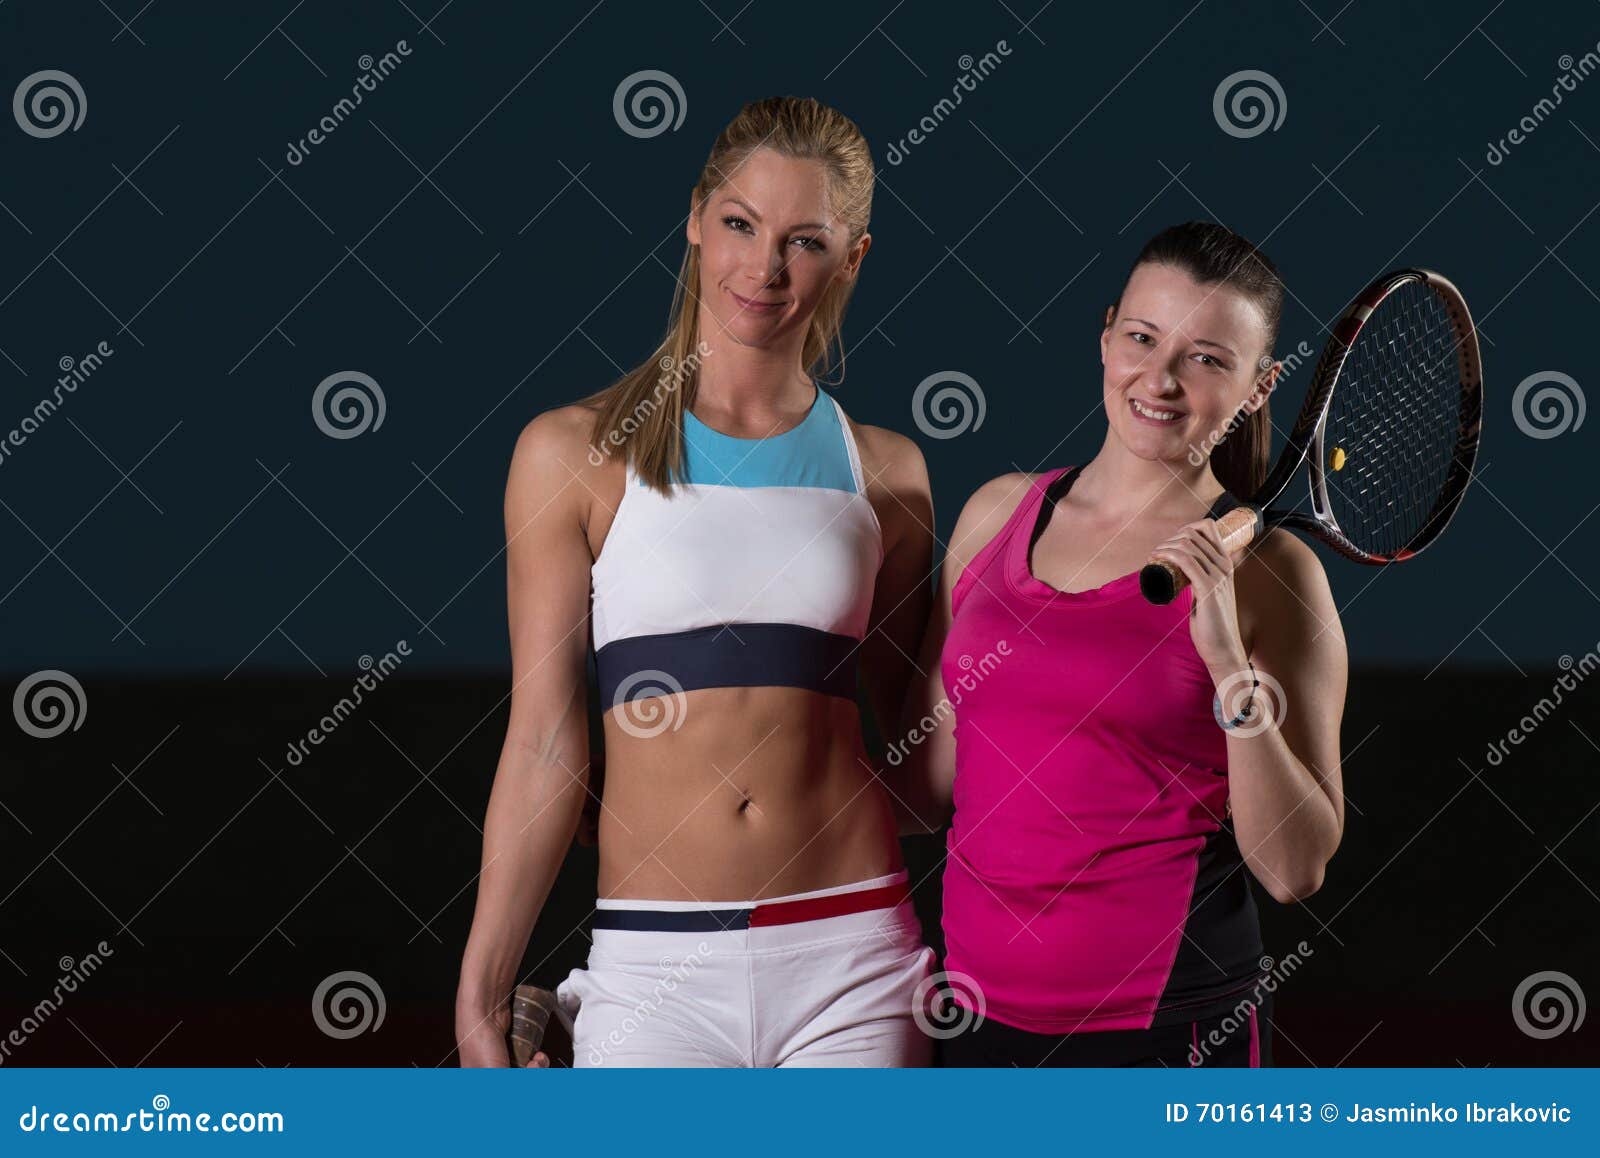 beautiful women playing tennis and looking happy